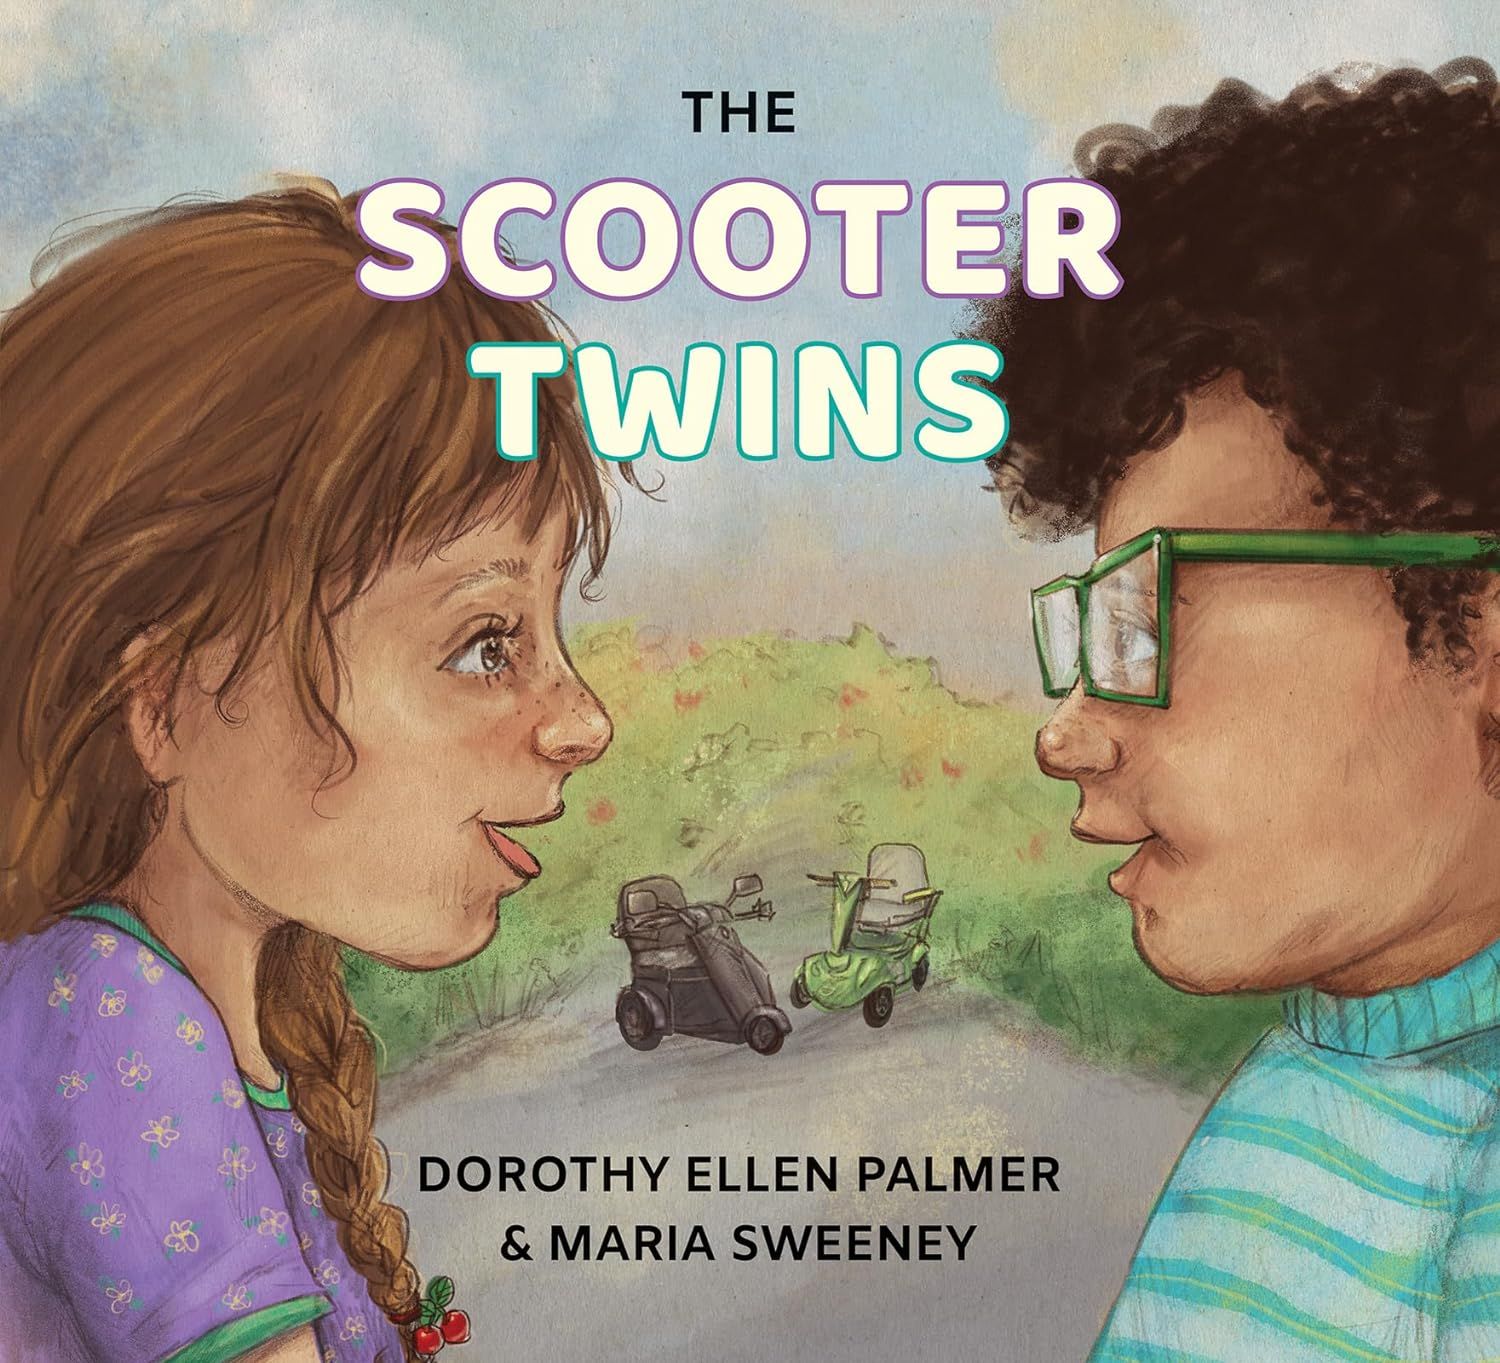 Cover of The Scooter Twins by Dorothy Ellen Palmer & Maria Sweeney